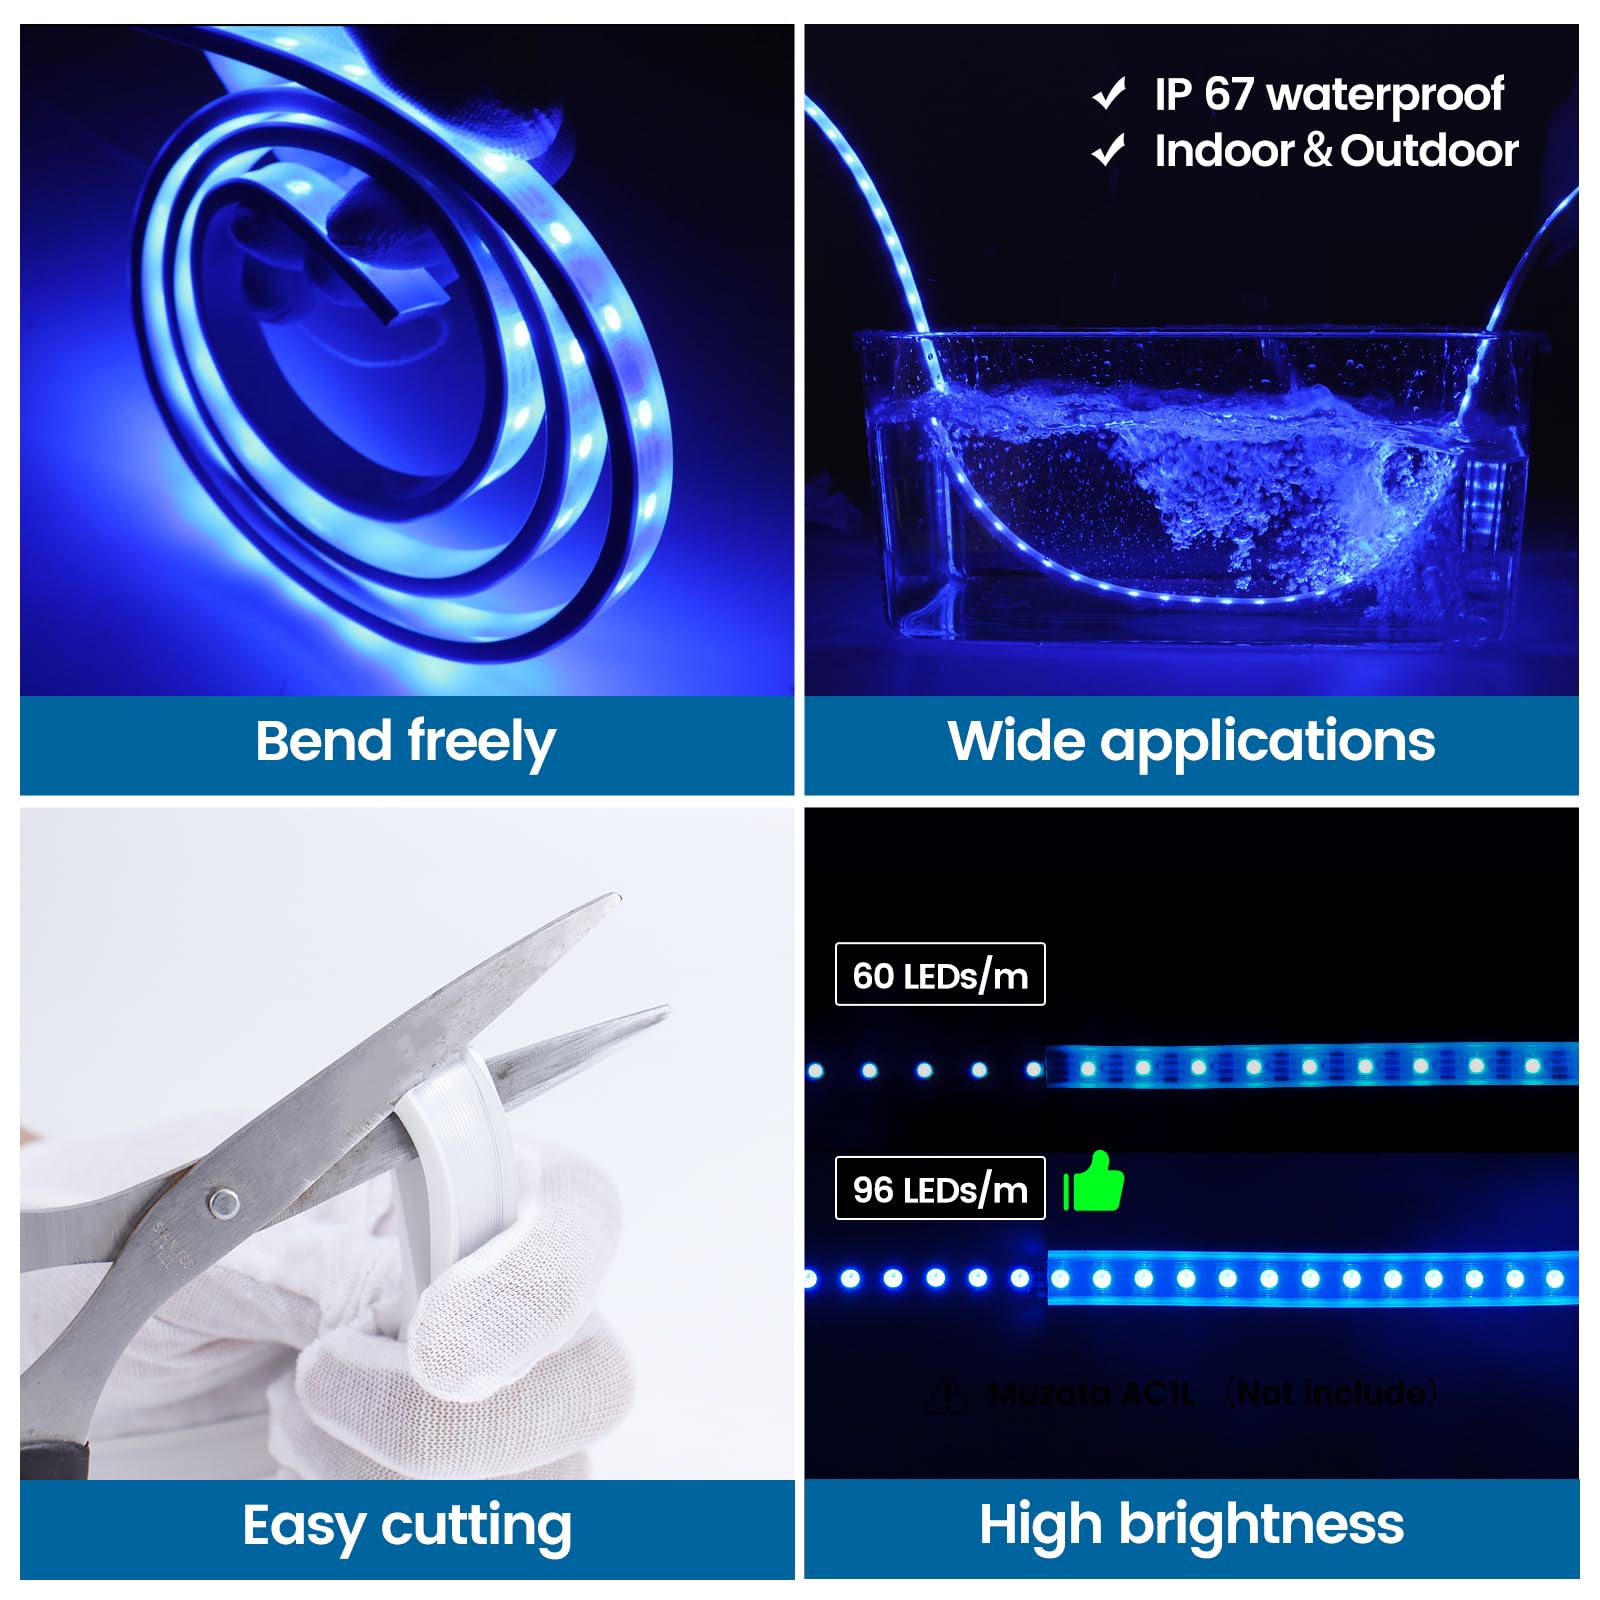 Ledstrips8 Silicone LED Channel System, LED Aluminum Profile New Substitutes, Soft Bending LED Profile, 5M 13x5mm, Waterproof IP67, Suit for 10mm Flex